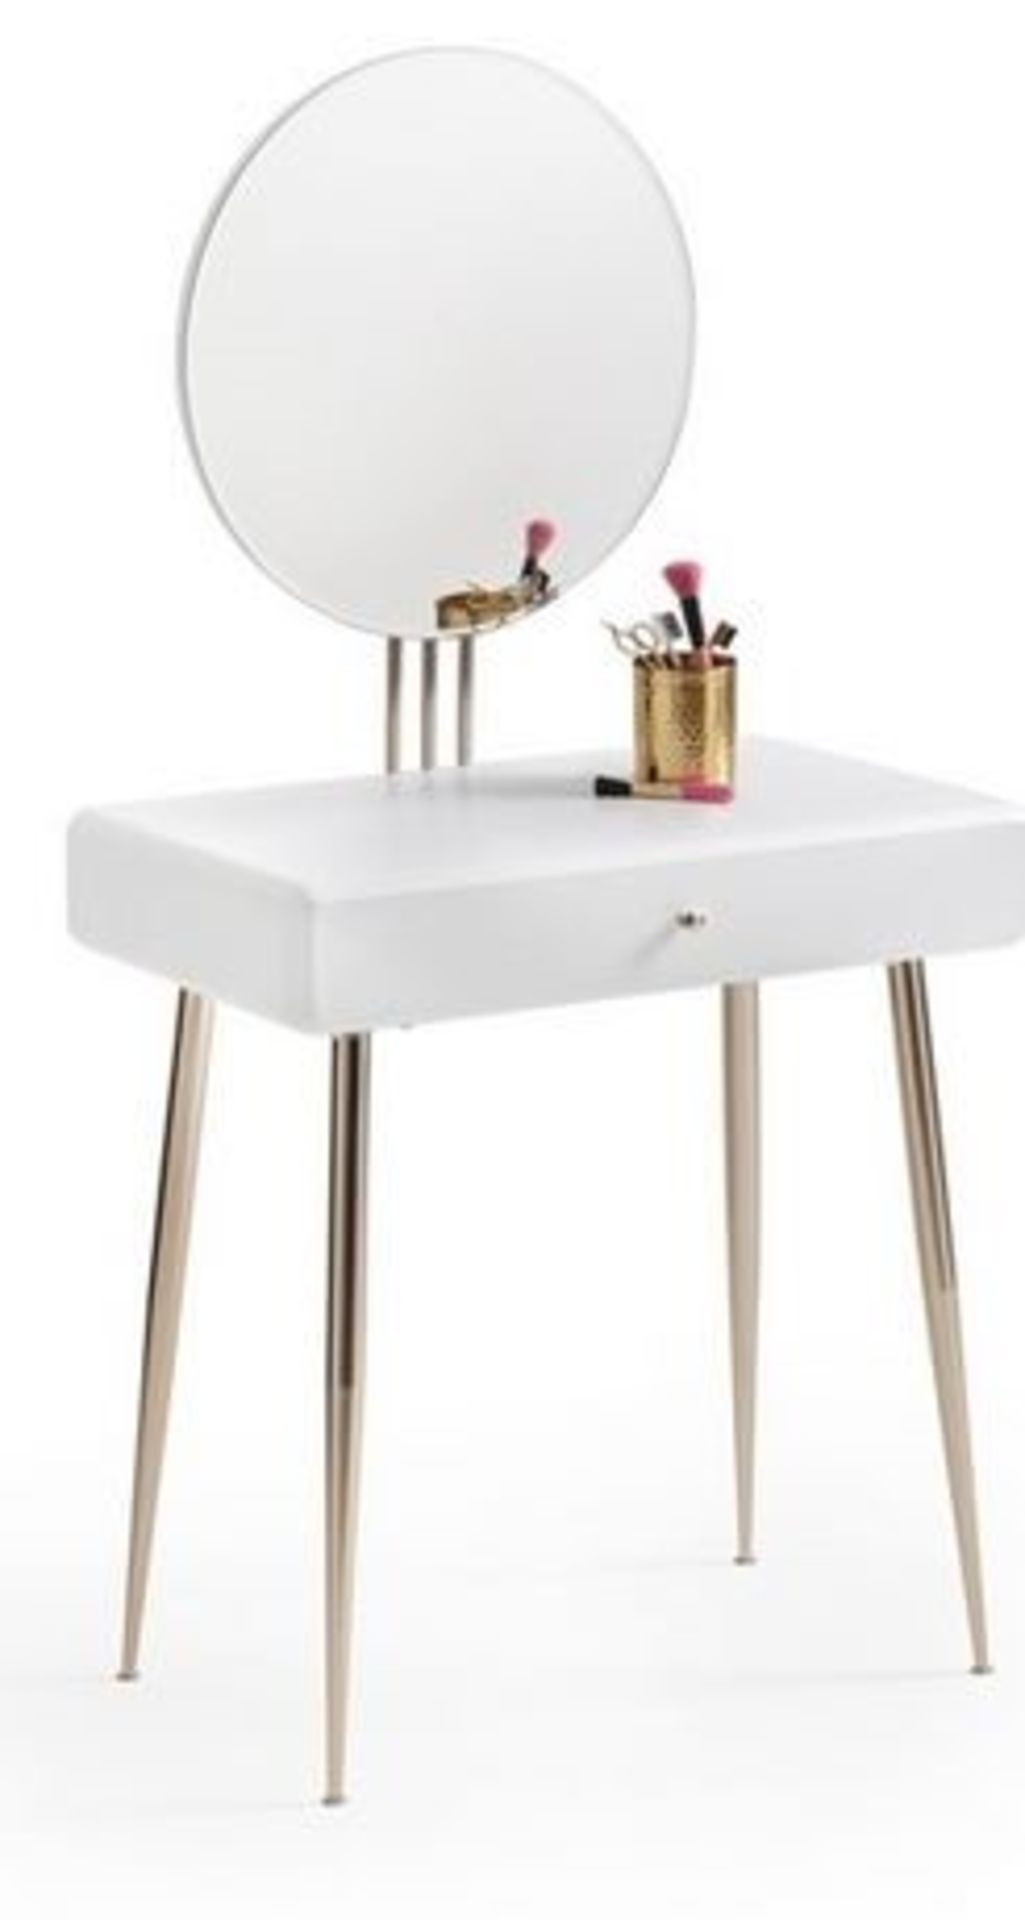 1 GRADE B BOXED DESIGNER CONTEMPORARY DRESSING TABLE IN WHITE / RRP £270.00 (PUBLIC VIEWING